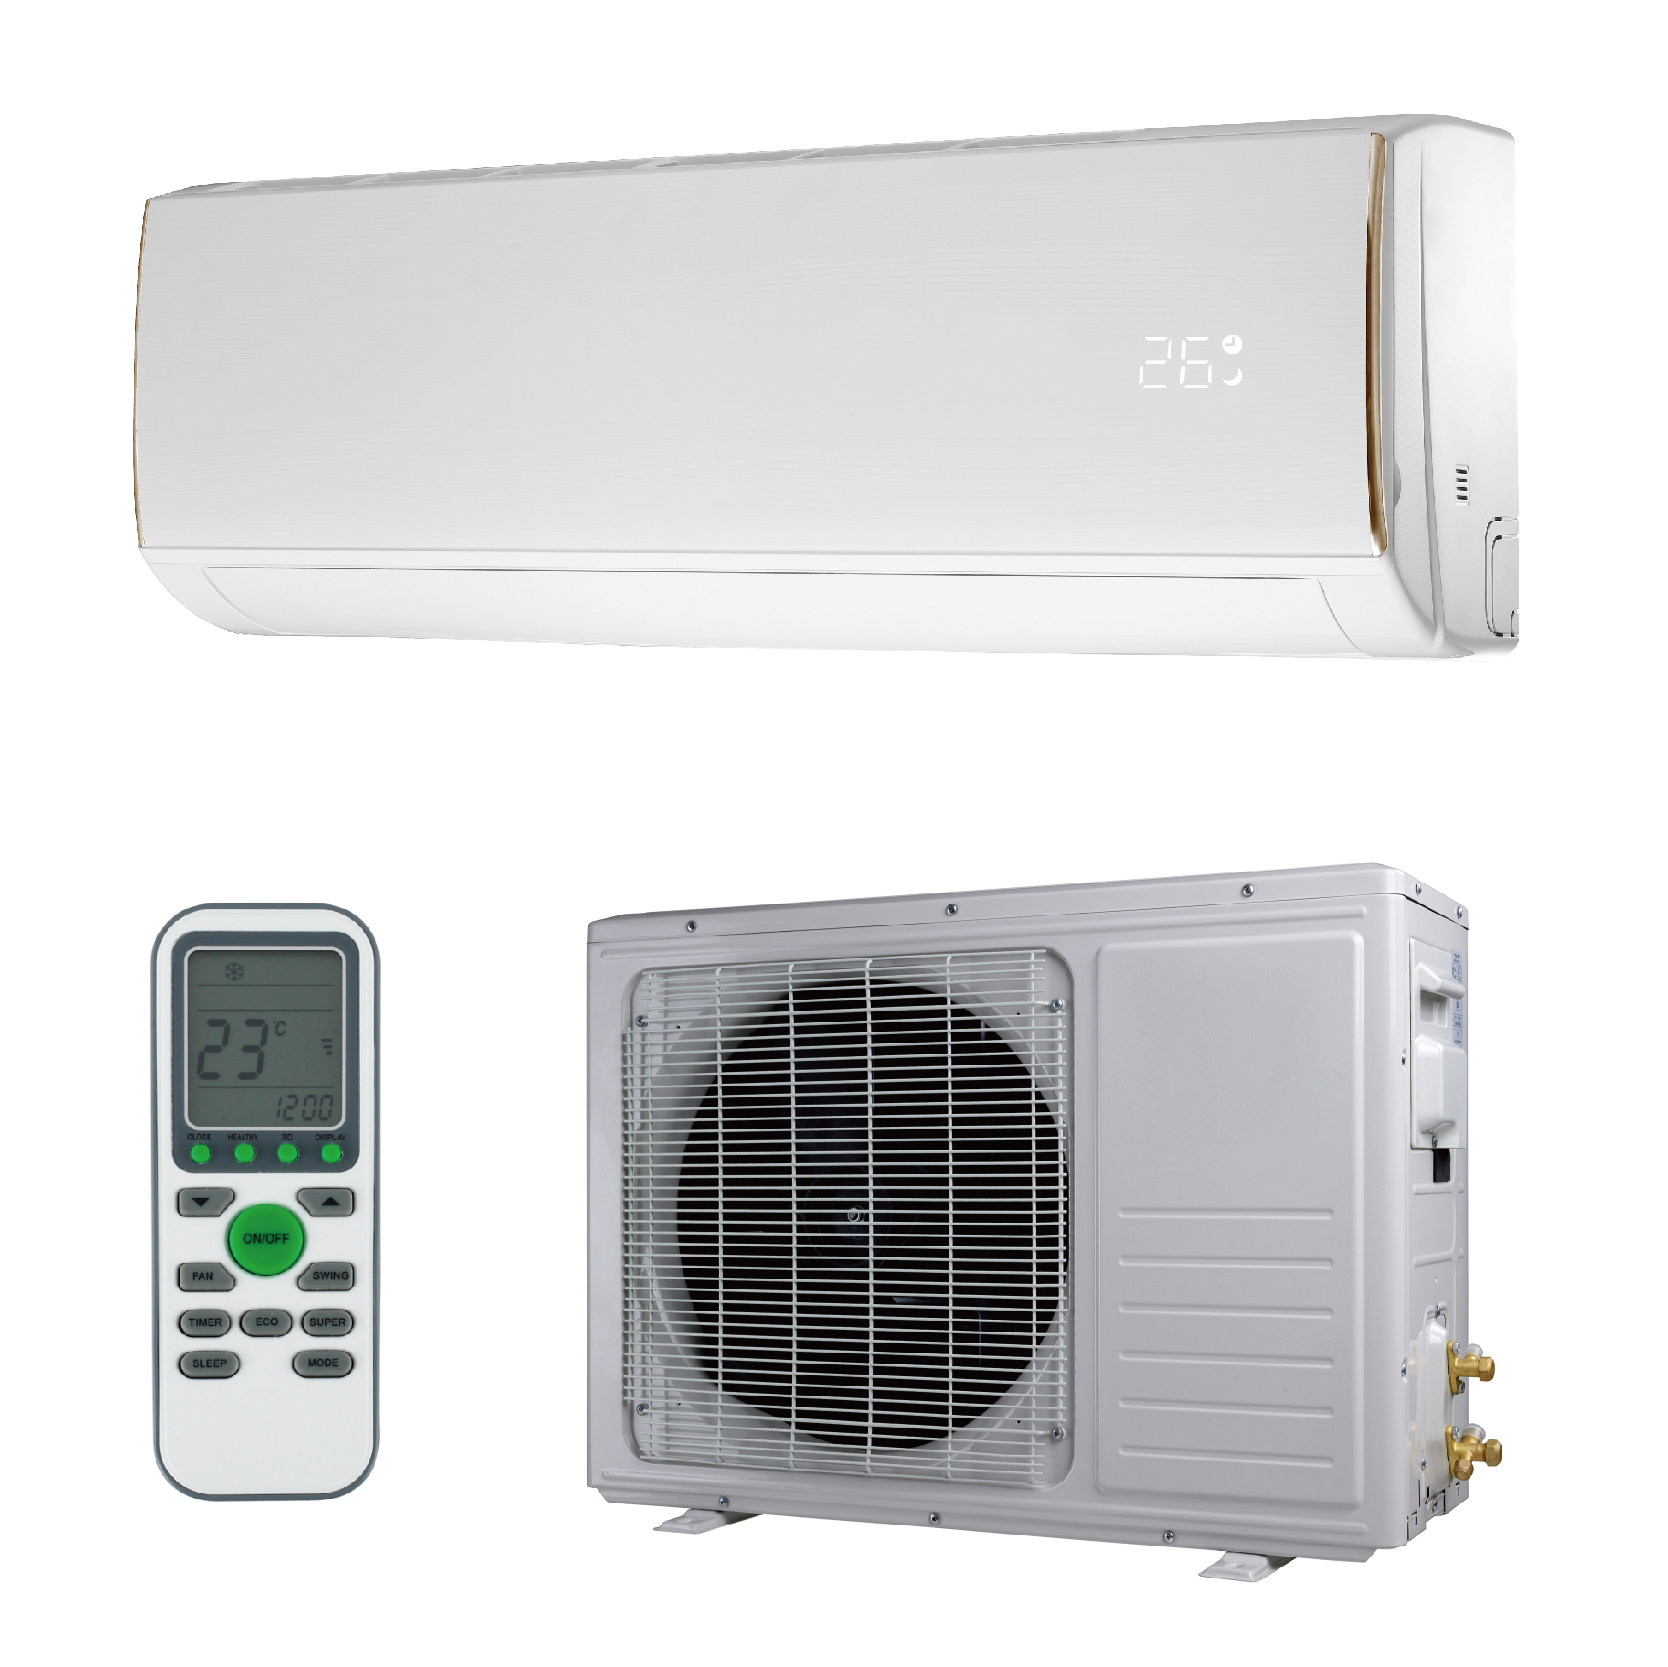 Carrier Releases Multiple High Temperature, Commercial Heat Pumps - Environment+Energy Leader